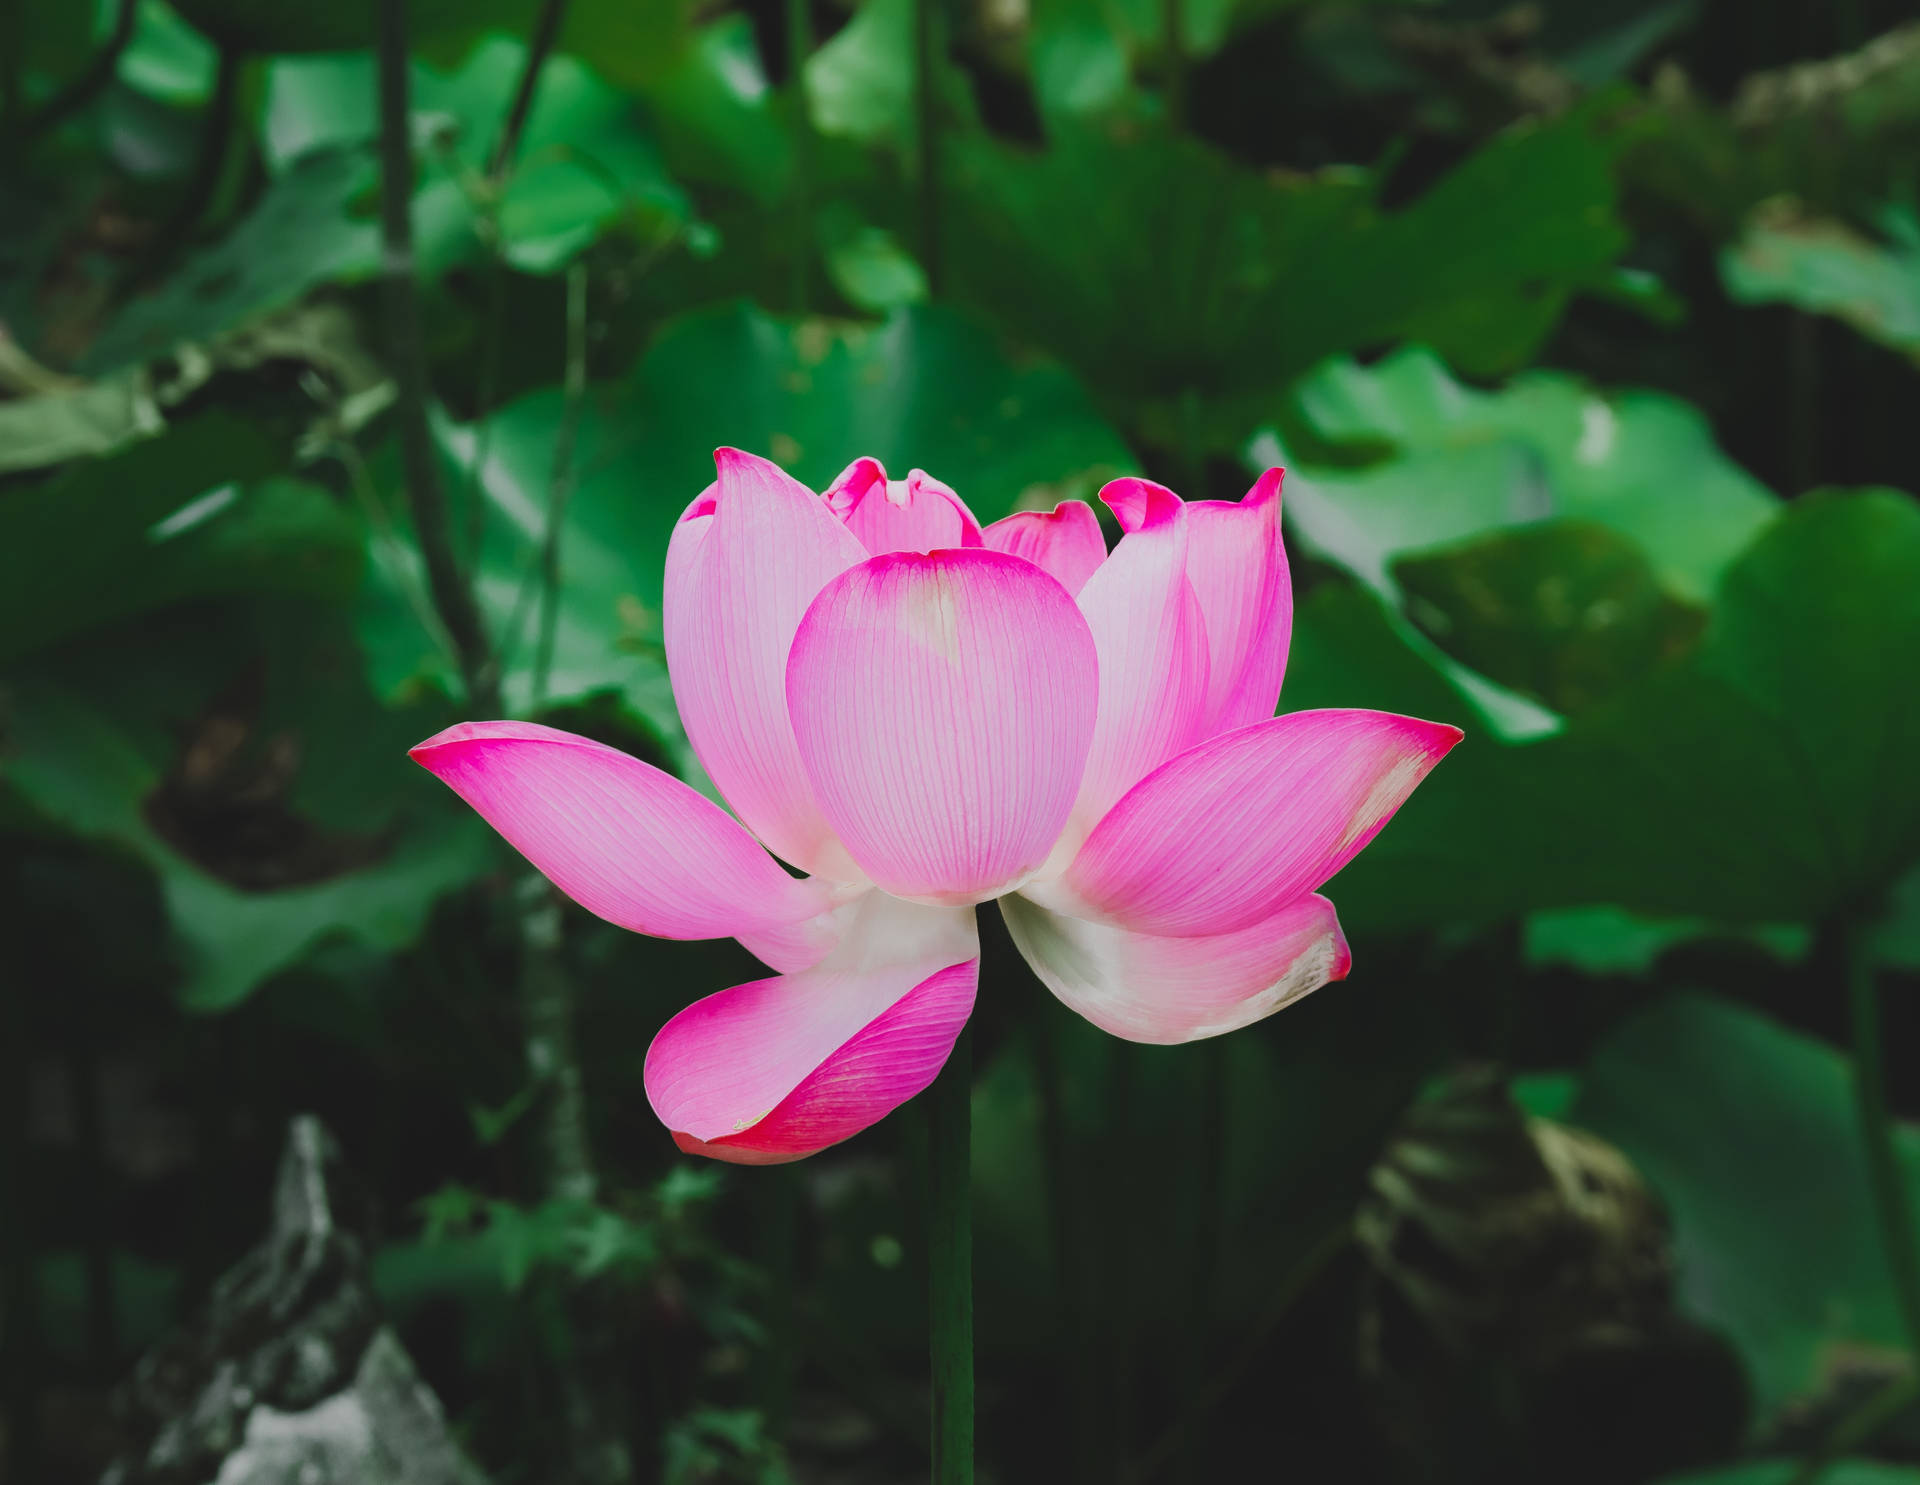 Lotus Flower 5177X4003 Wallpaper and Background Image